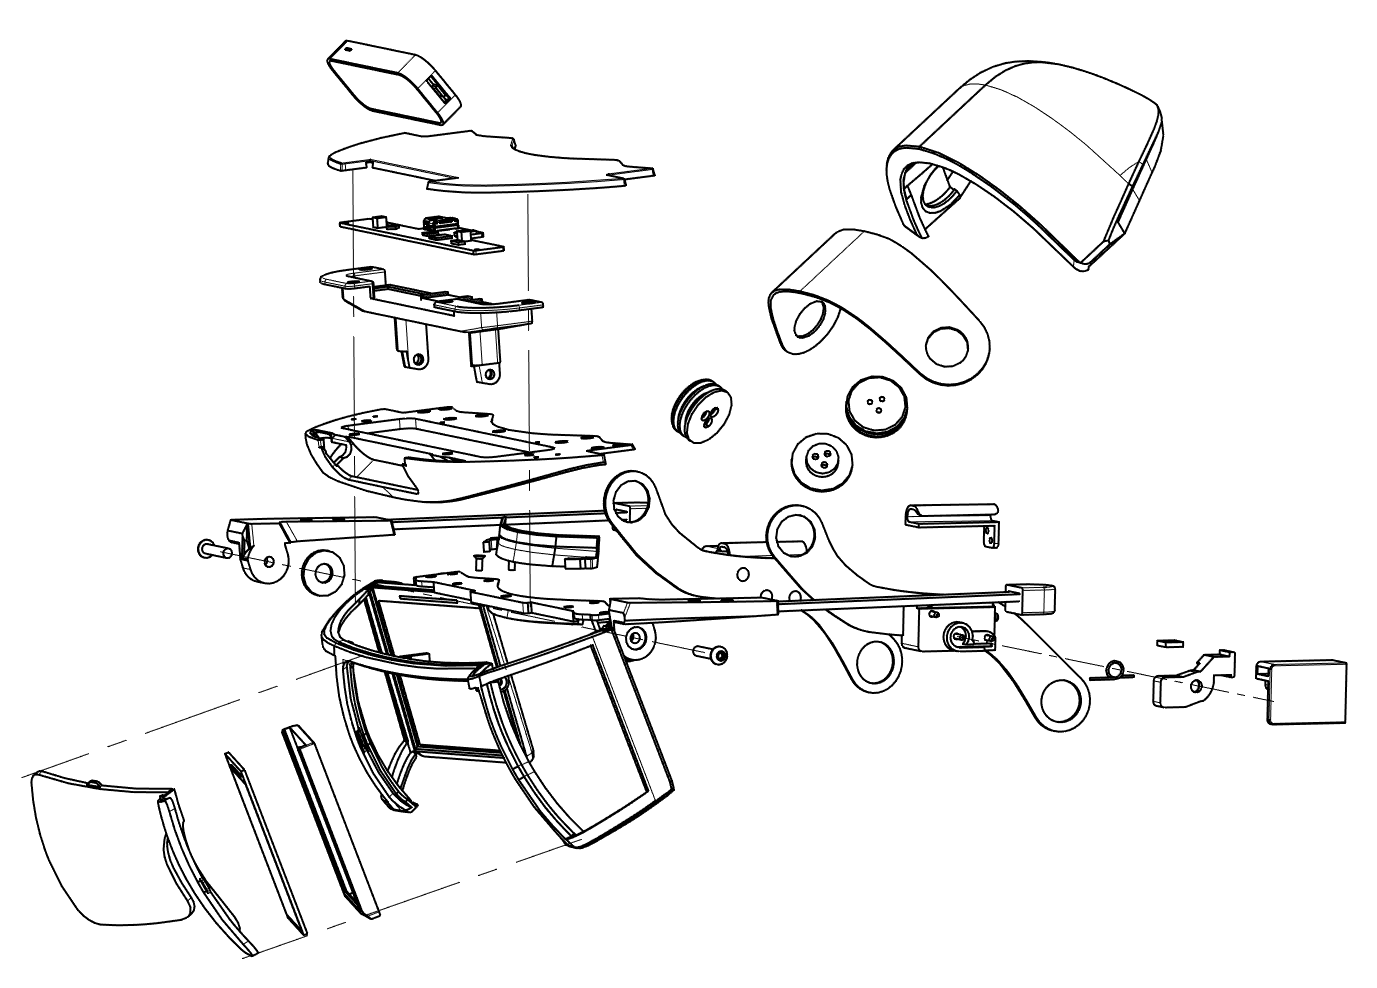 Smart Surface Exploded View